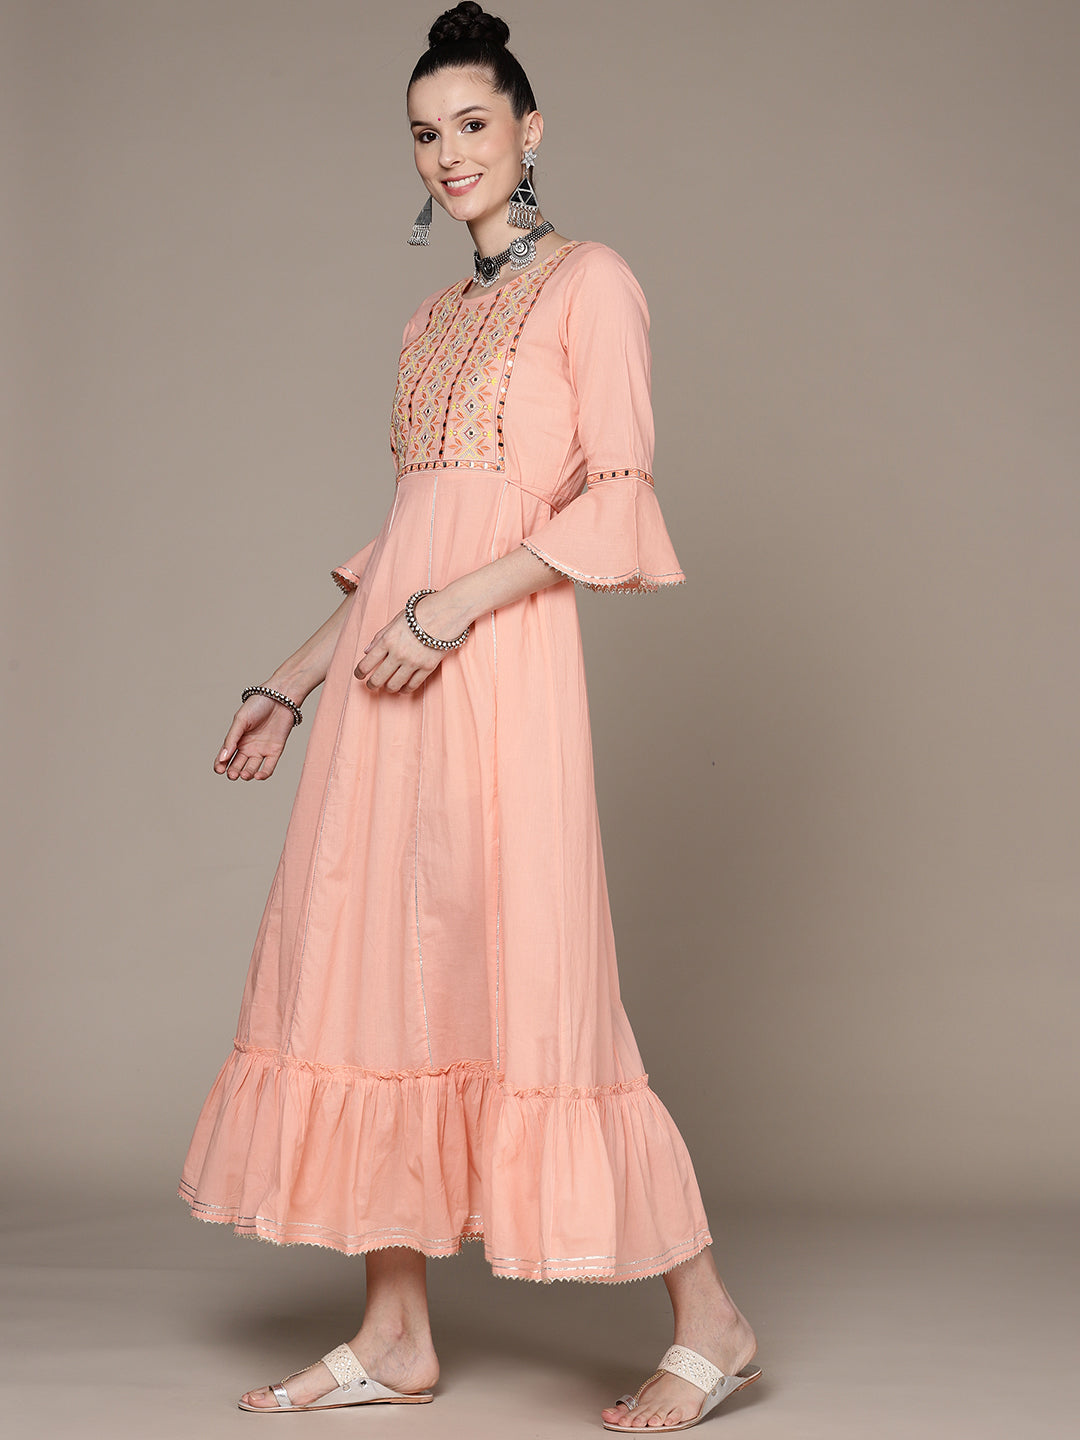 Women's Peach Cotton Embroidered A-Line Dress